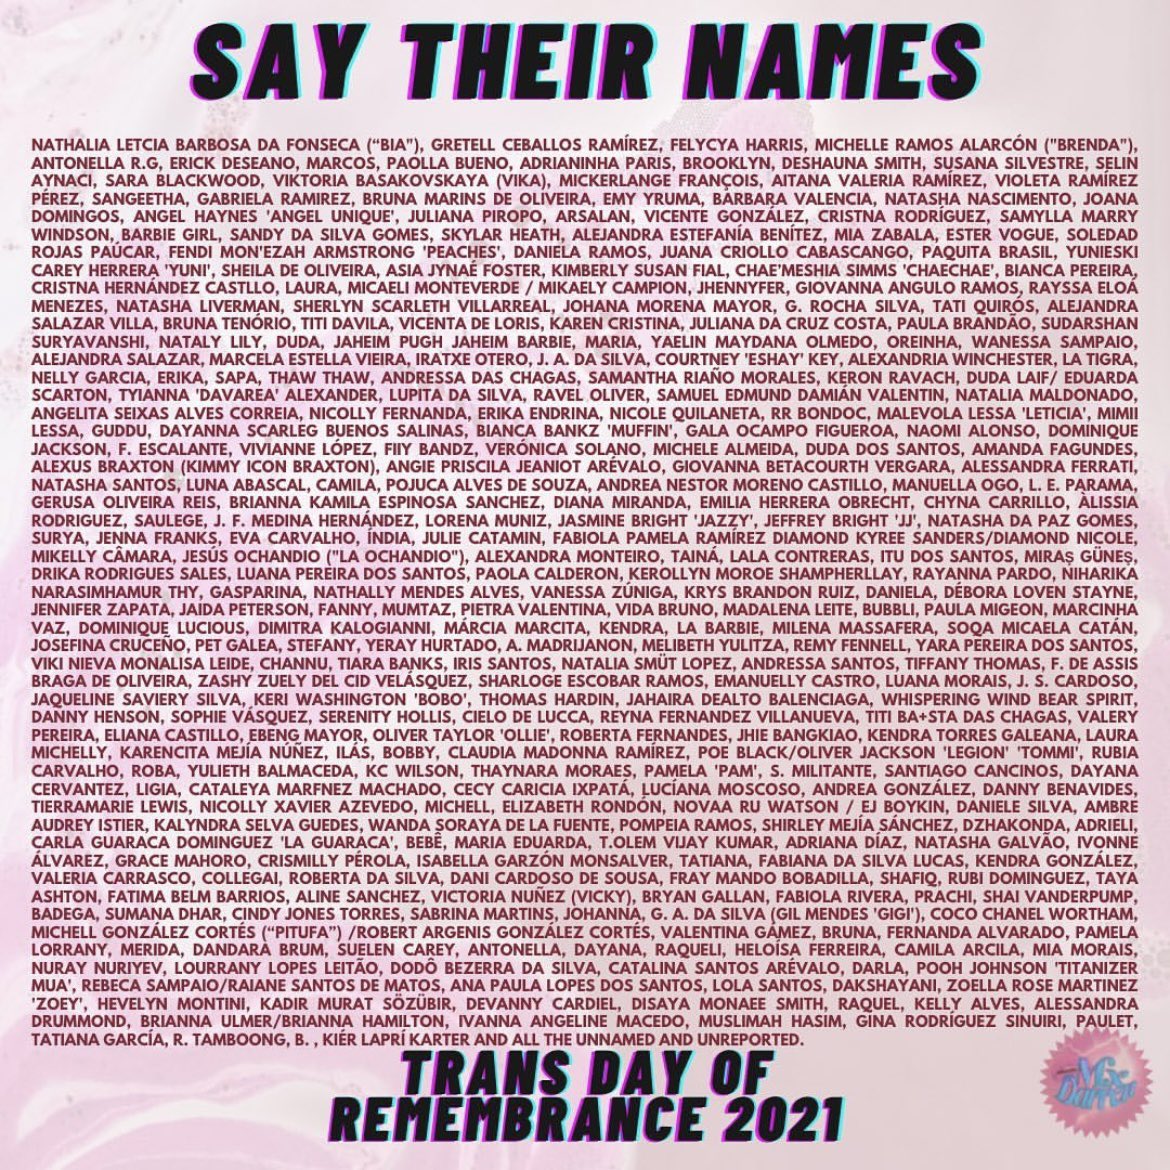 In the last year, at least 375 trans people were murdered, the highest number since records began.

Most were trans women of colour, migrant trans women or trans sex workers.

Today, we commemorate their lives and we commit to action.
#tdor2021